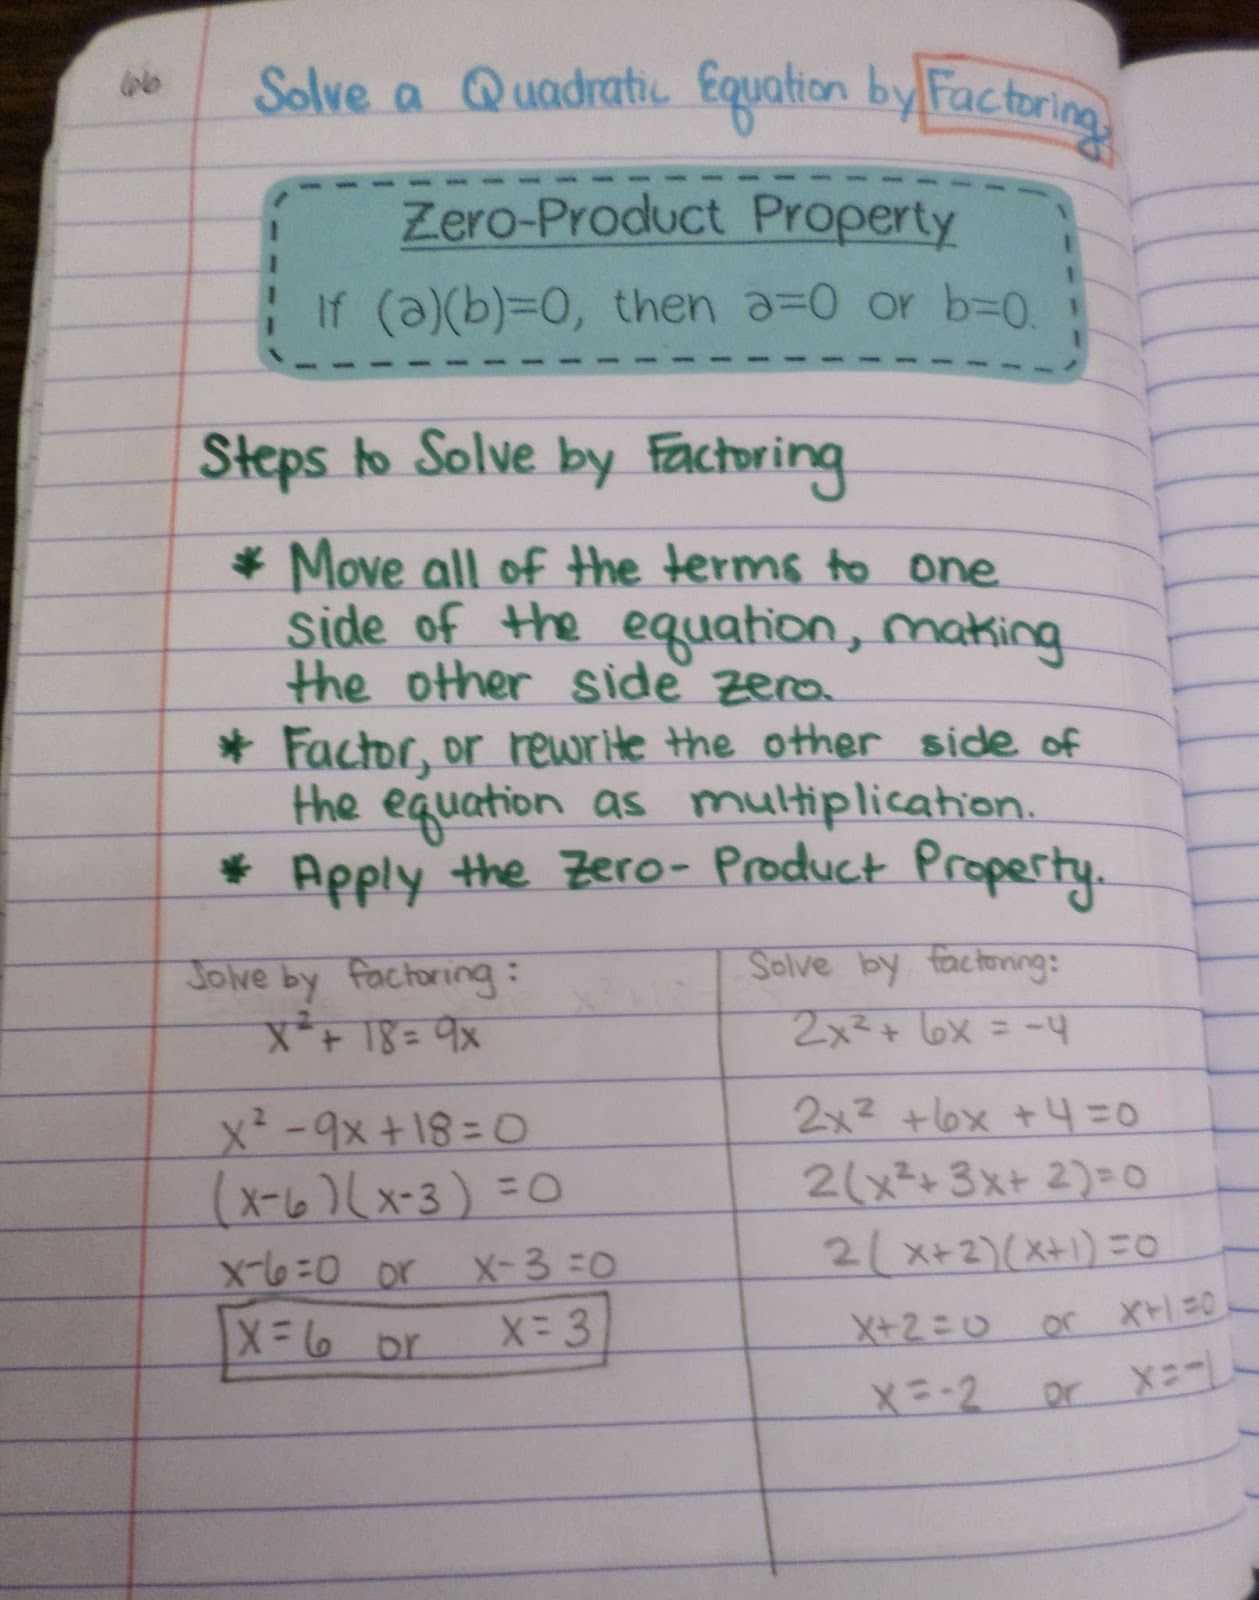 Factoring by Grouping Worksheet Along with Math = Love solving Quadratics by Factoring and the Zero Product